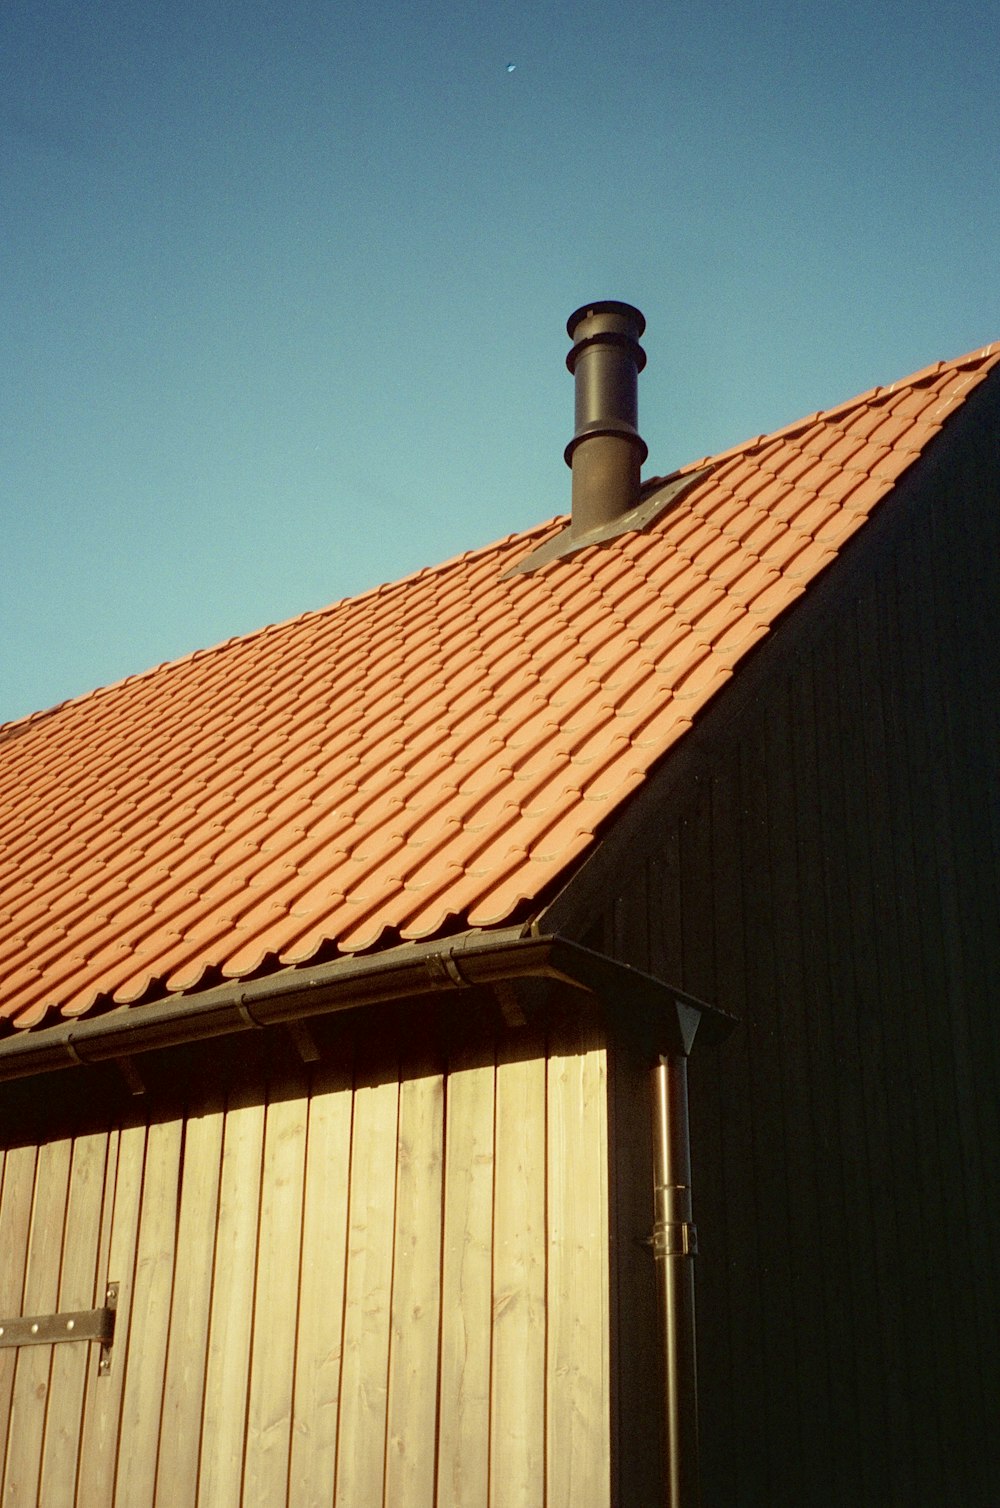 a brown building with a red roof and a black chimney